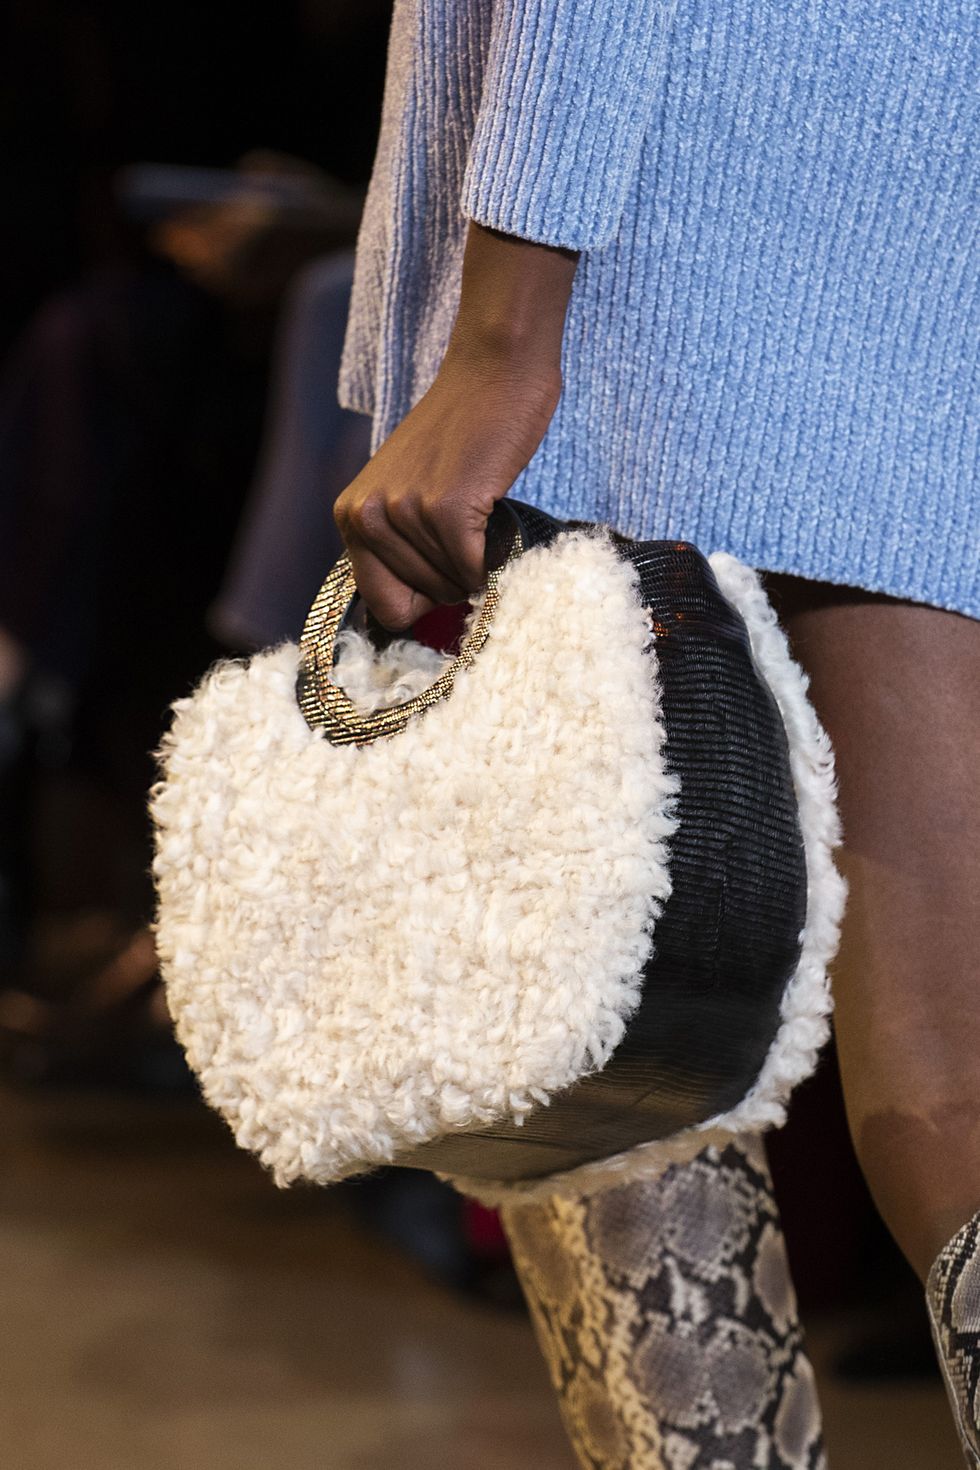 13 Fall Bag Trends 2019 — Top Fall Accessory Runway Trends For Women